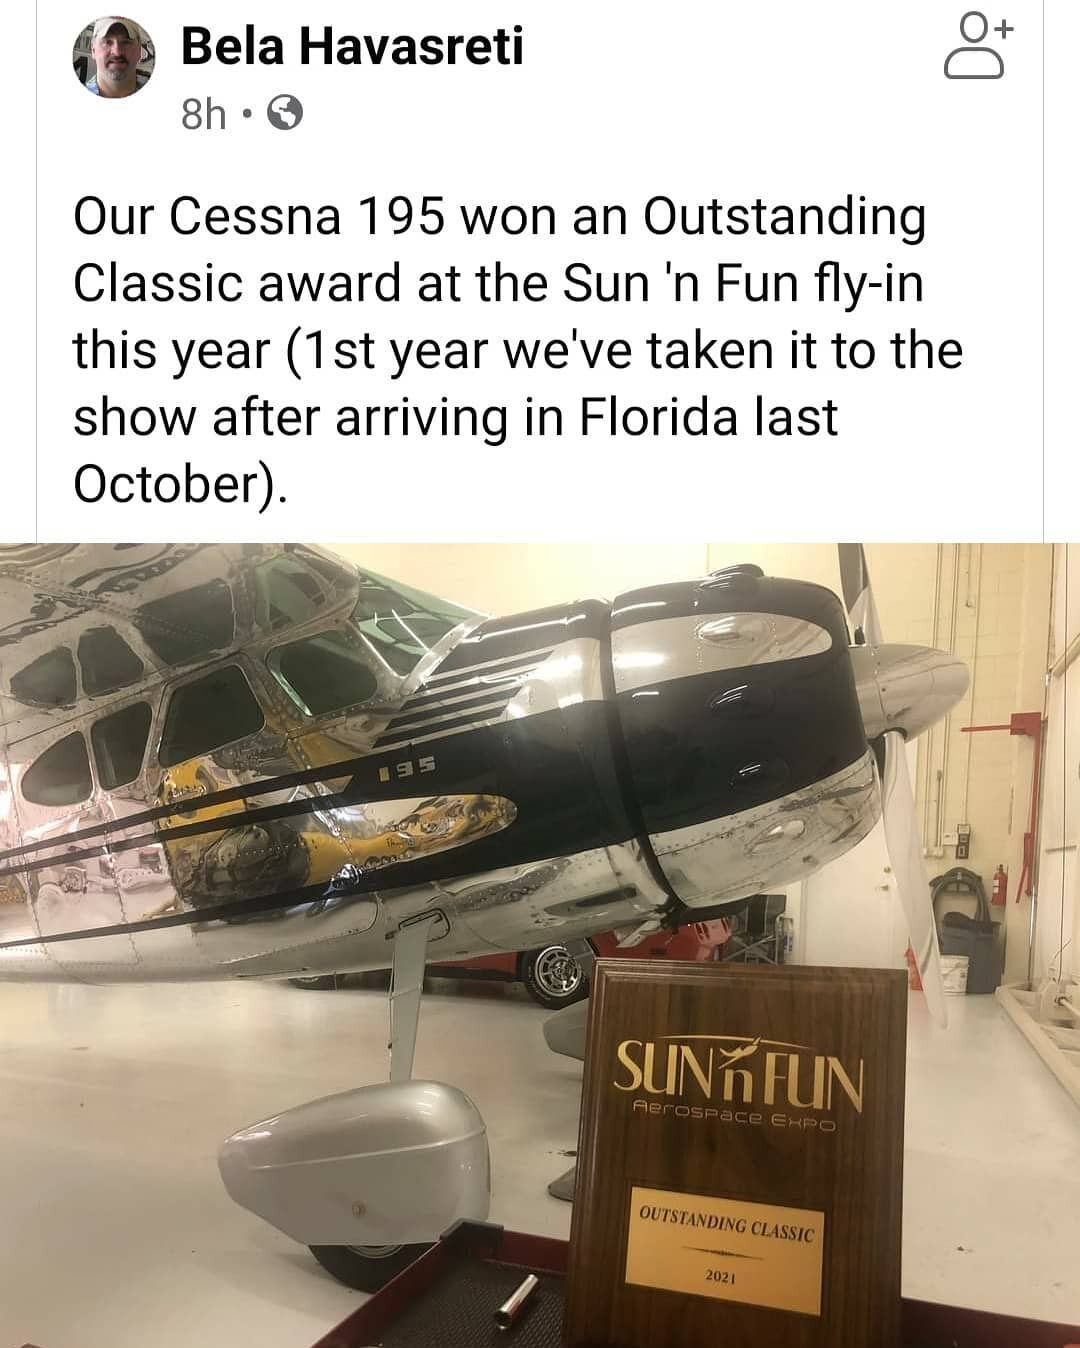 Congratulations to Bela for his outstanding Cessna 195 Classic. What a beautiful airplane 
Wesley Flyers Inc